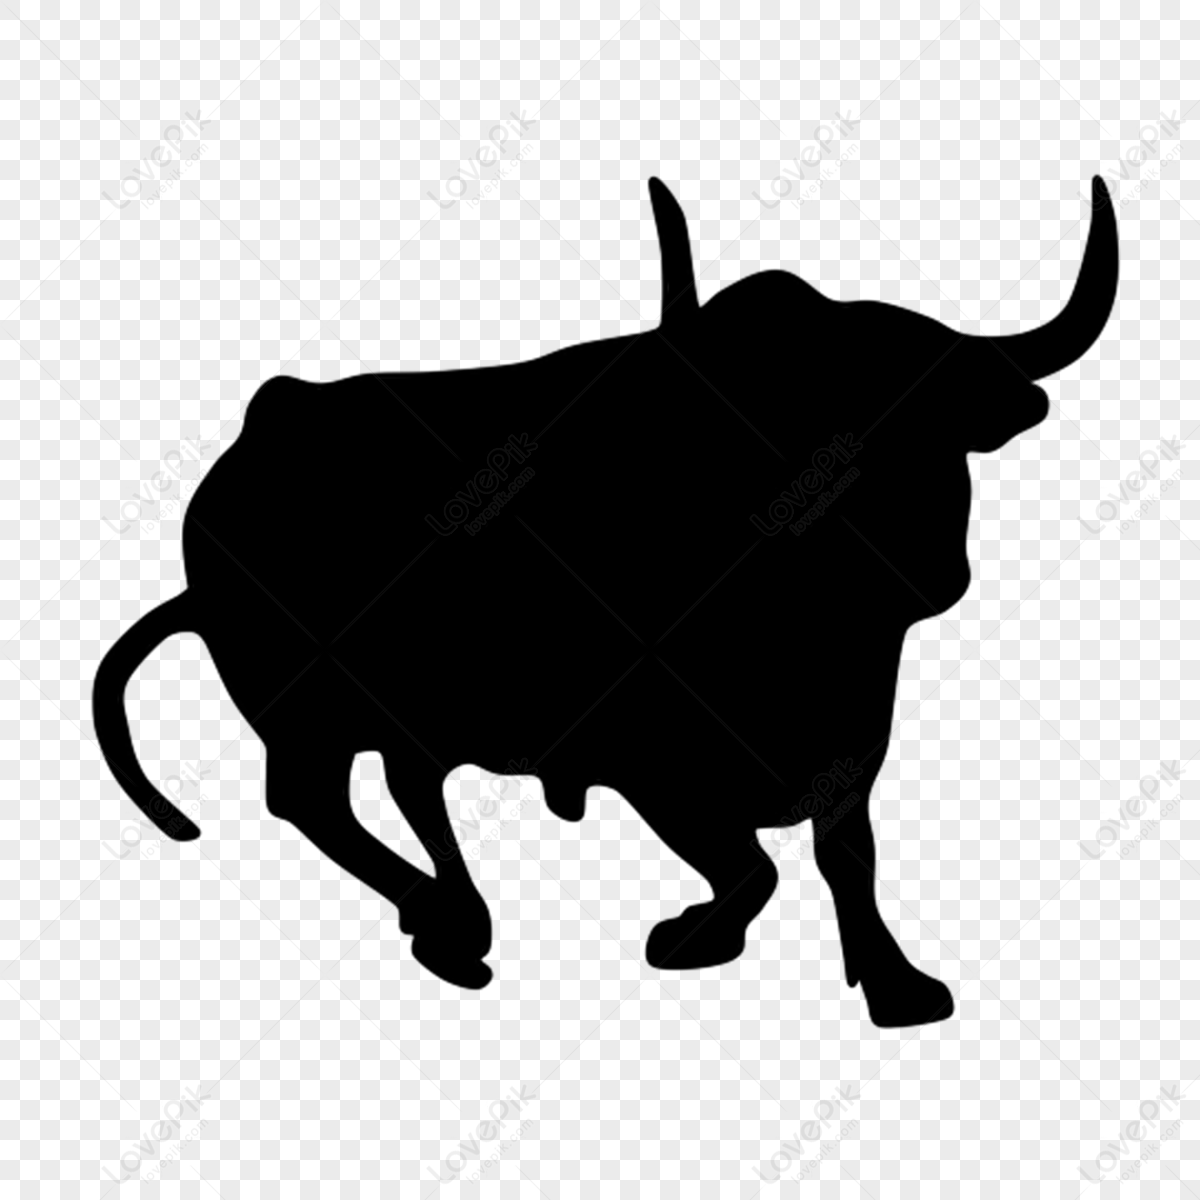 Rhino Silhouette Images, HD Pictures For Free Vectors Download ...